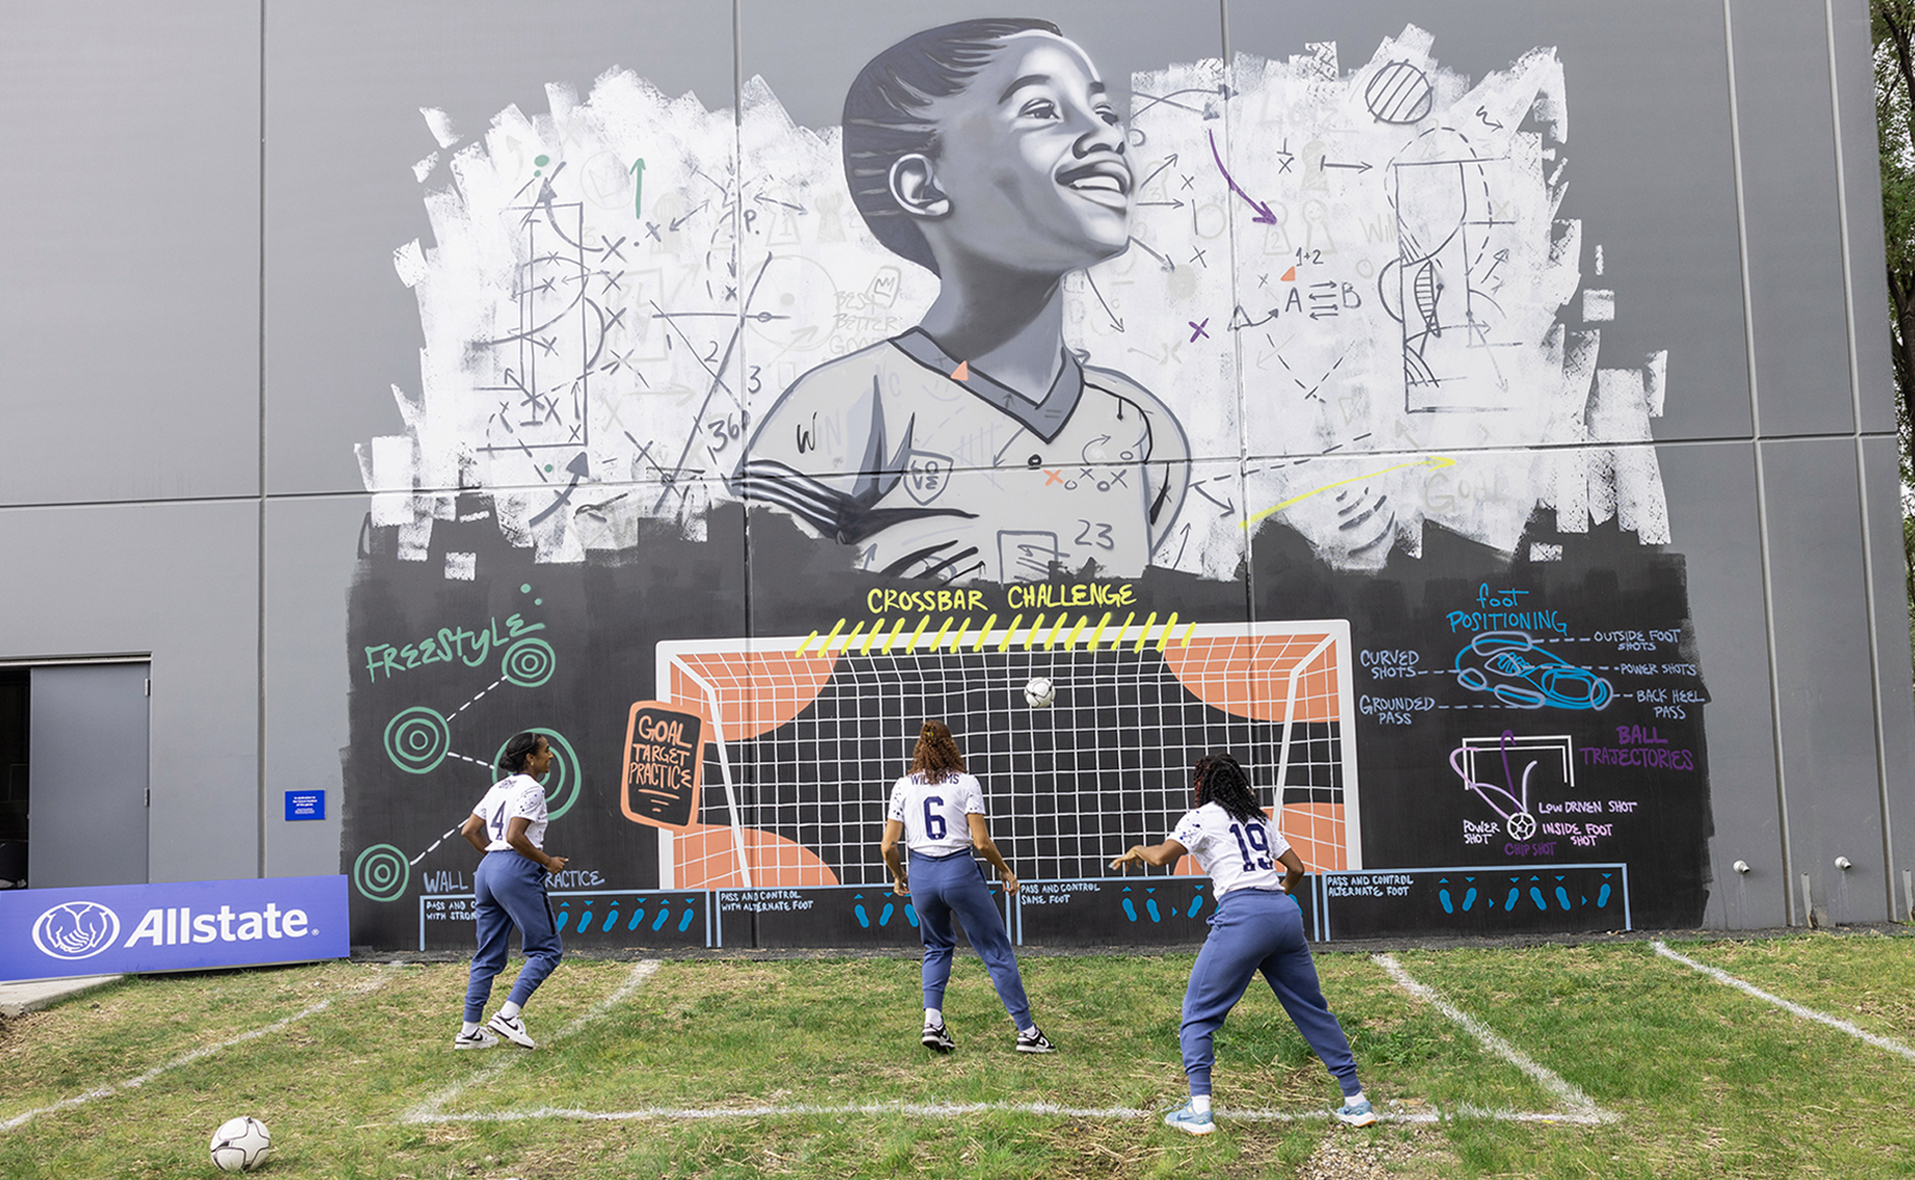 Allstate Debuts Teaching Mural to Develop Youth Soccer Gamers